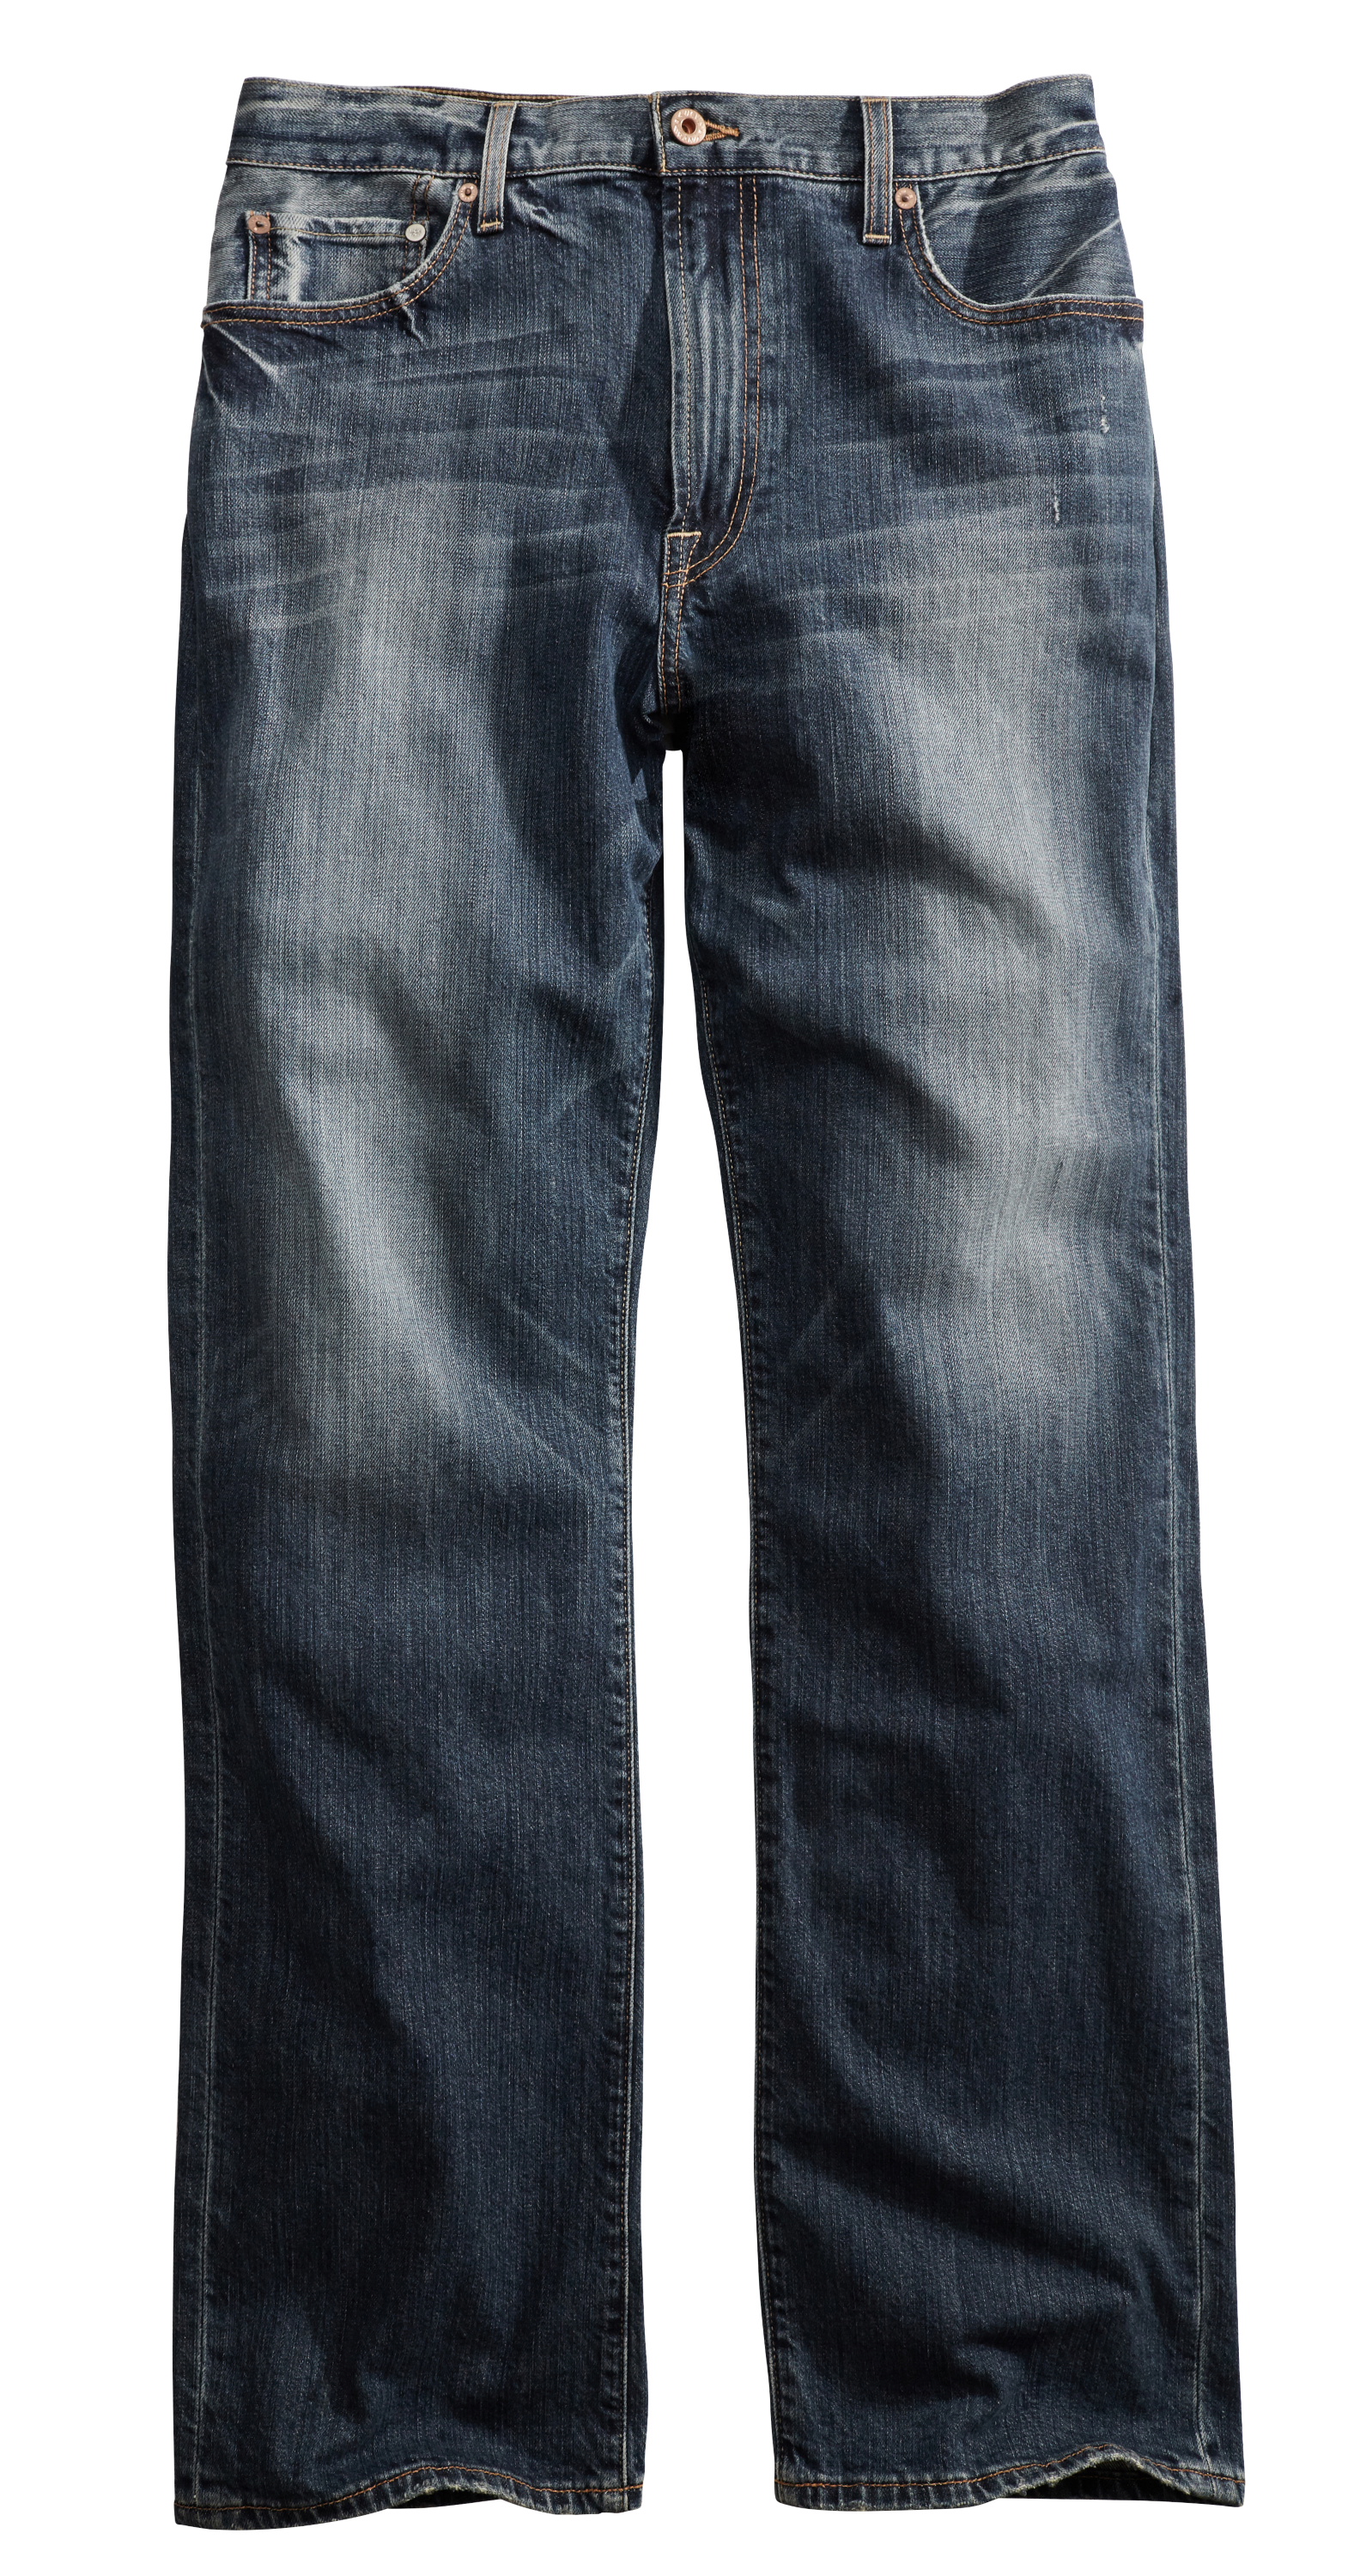 Lucky Jeans 181 Relaxed Straight Aliso Wash